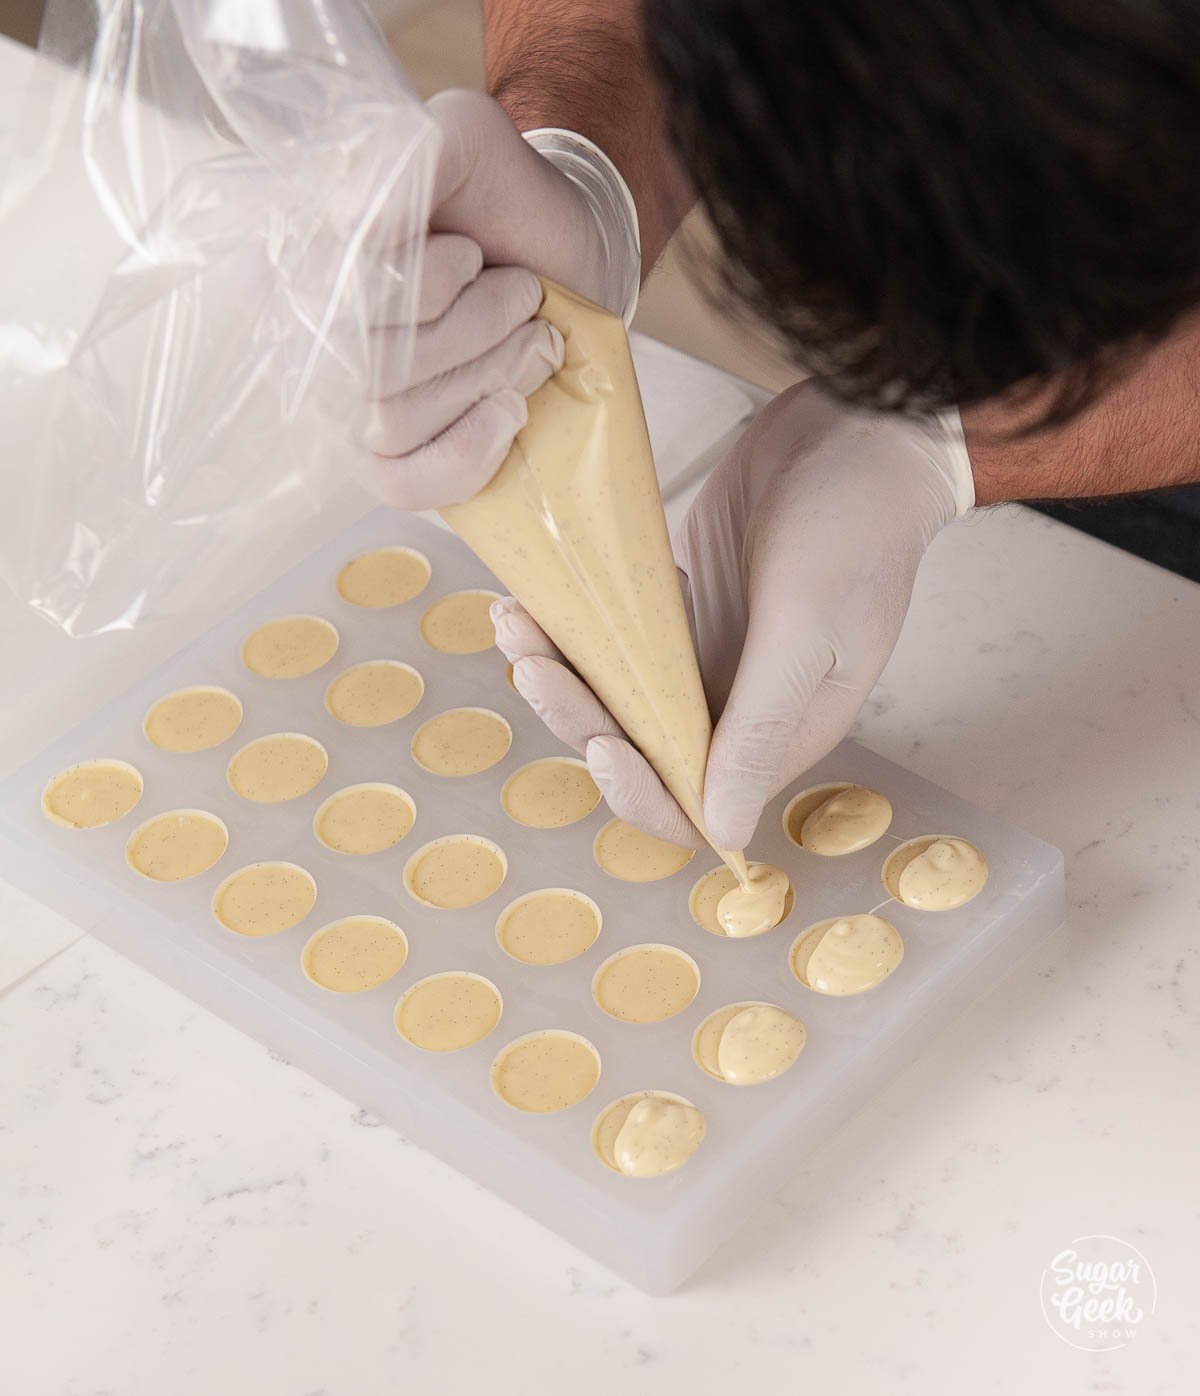 piping chocolate ganache onto the back of your bonbon mold